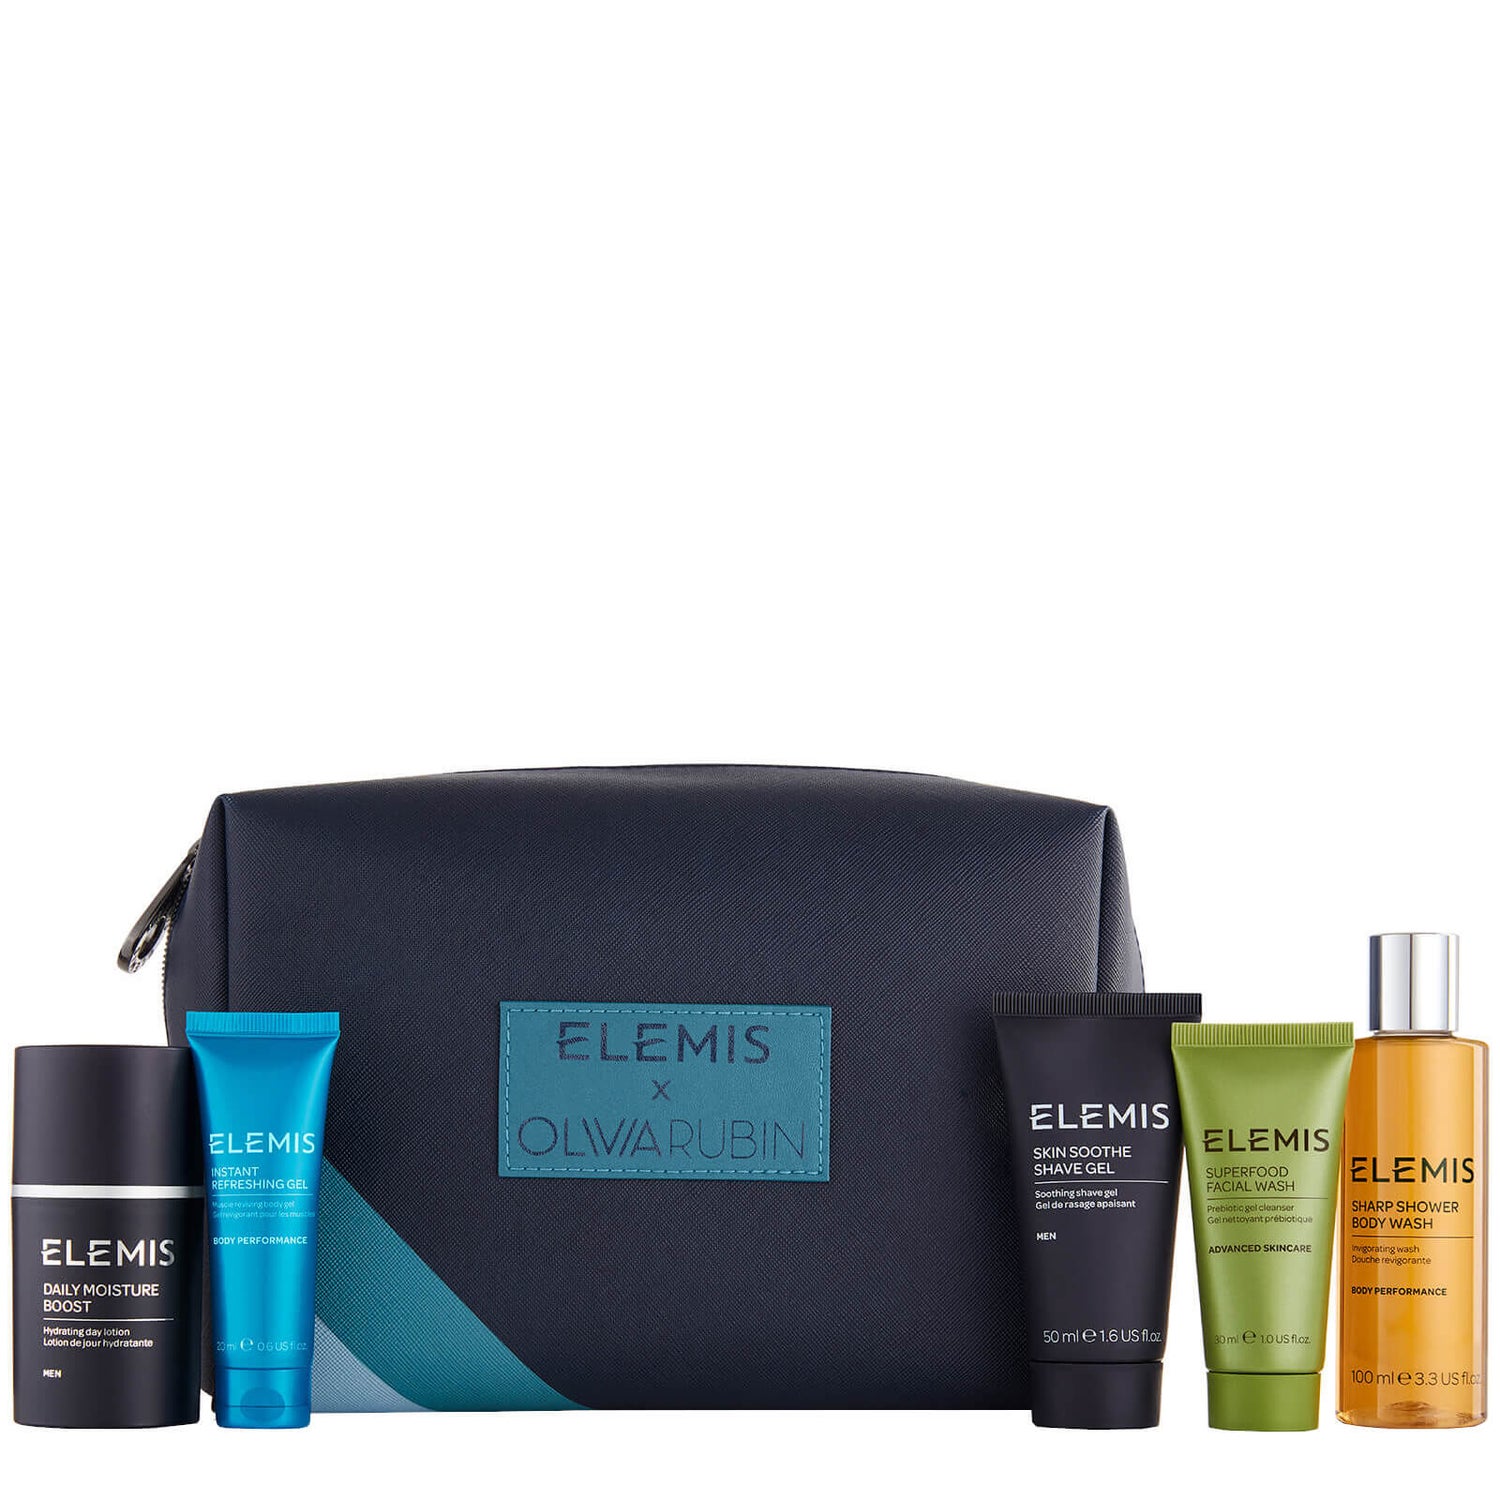 Elemis Limited Edition Olivia Rubin Travel Collection Gift Set for Him (Worth £62.00)